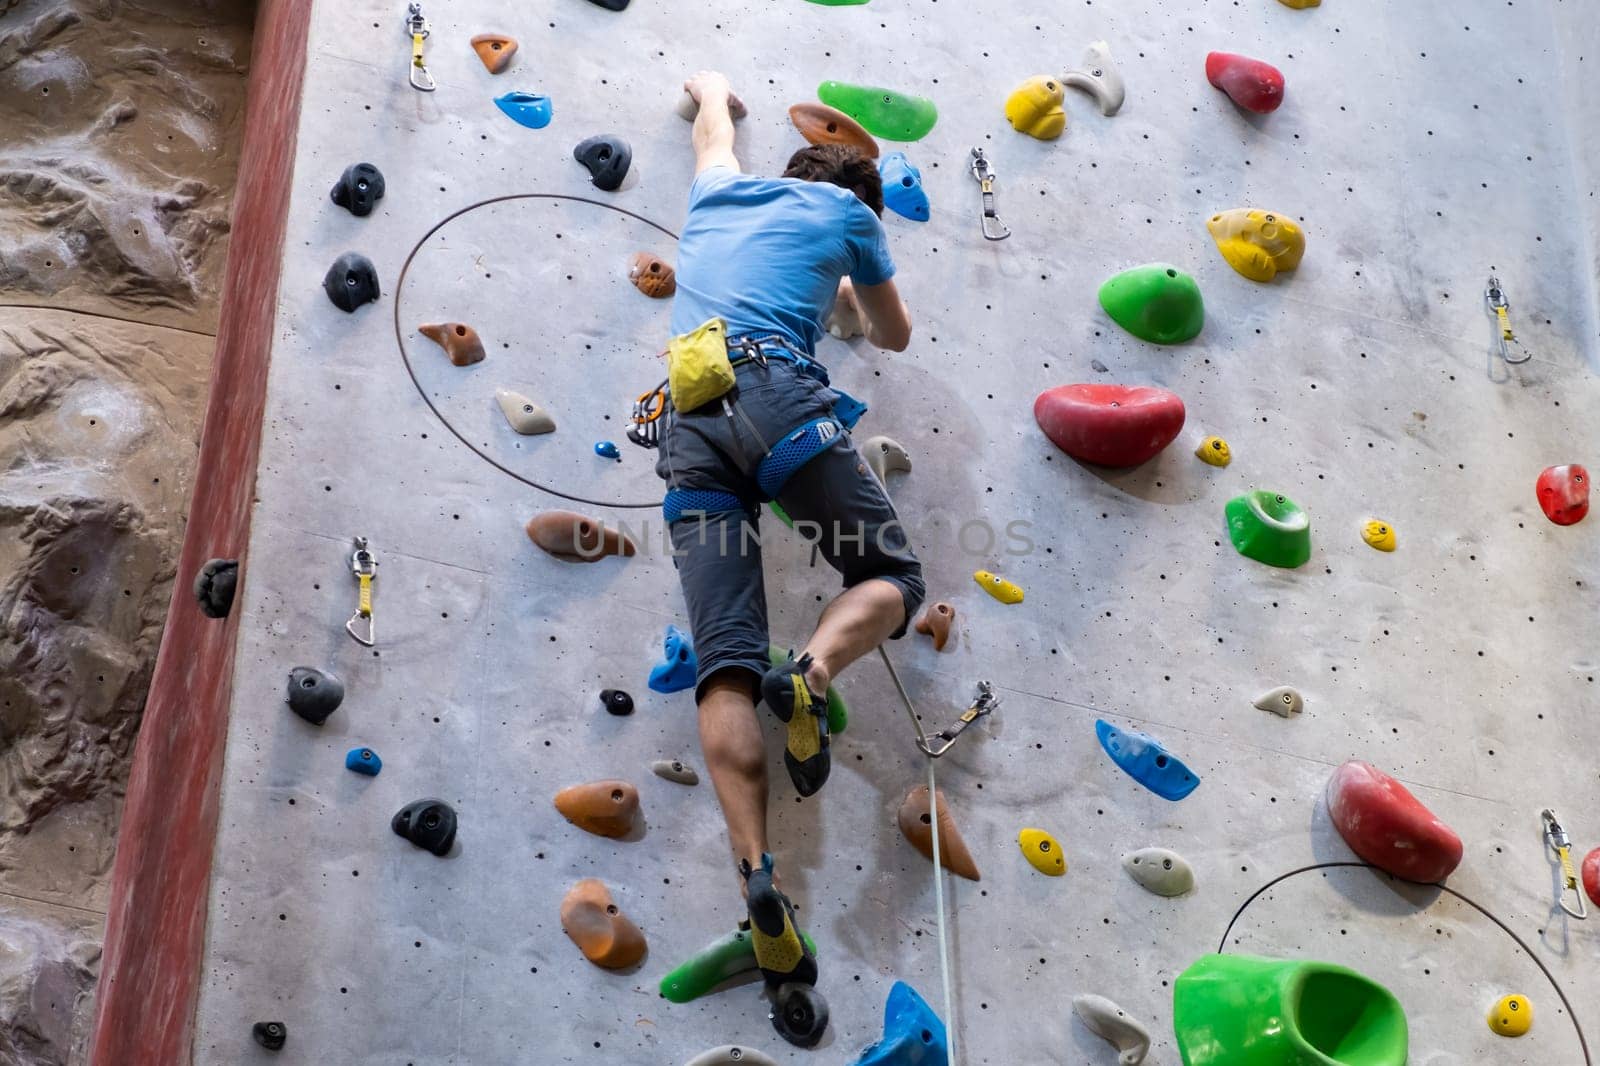 The climber trains on the artificial rock wall with insurance in bouldering gym, April 2022, Prague, Czech Republic.